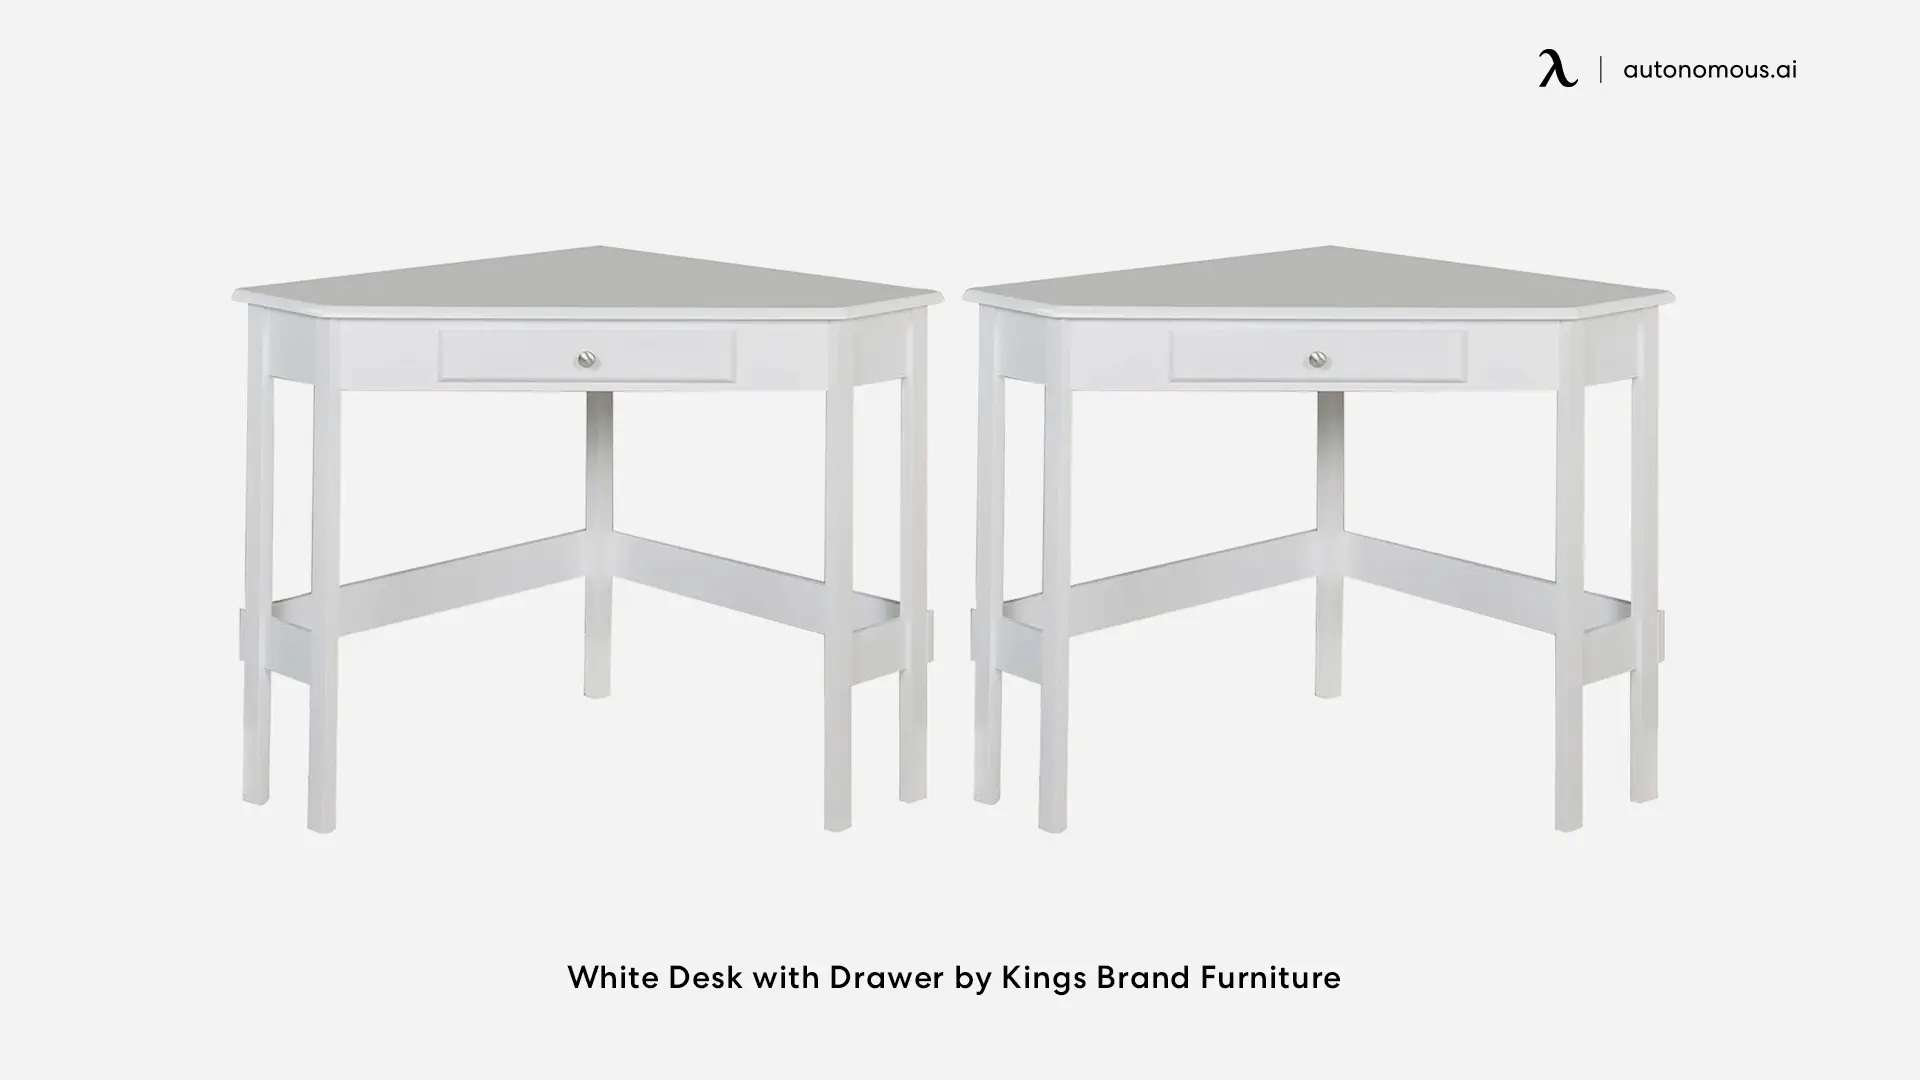 White Desk with Drawer by Kings Brand Furniture